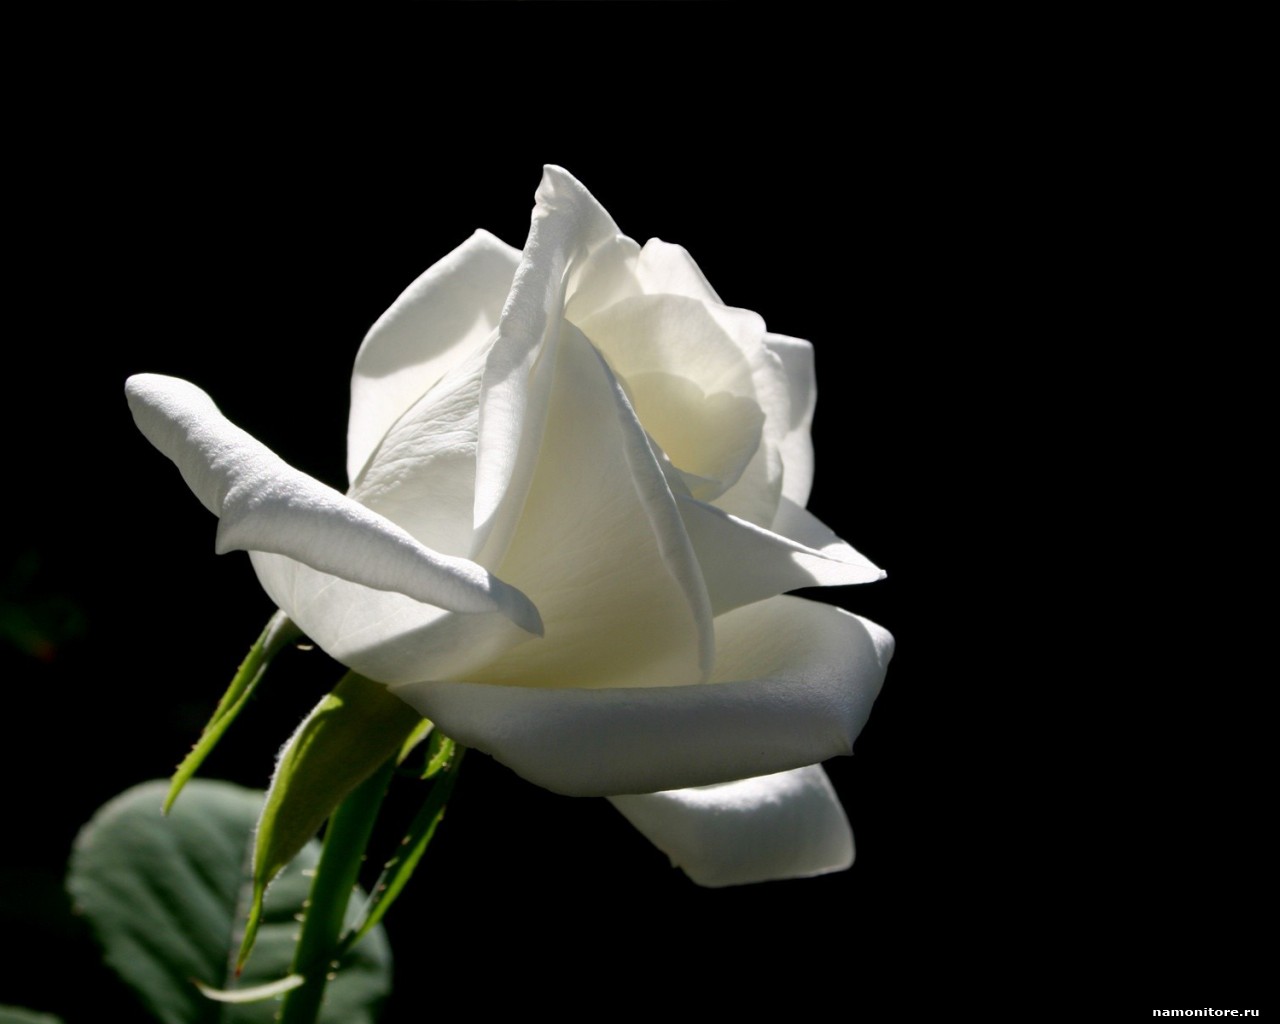 The White rose on a black background black flowers